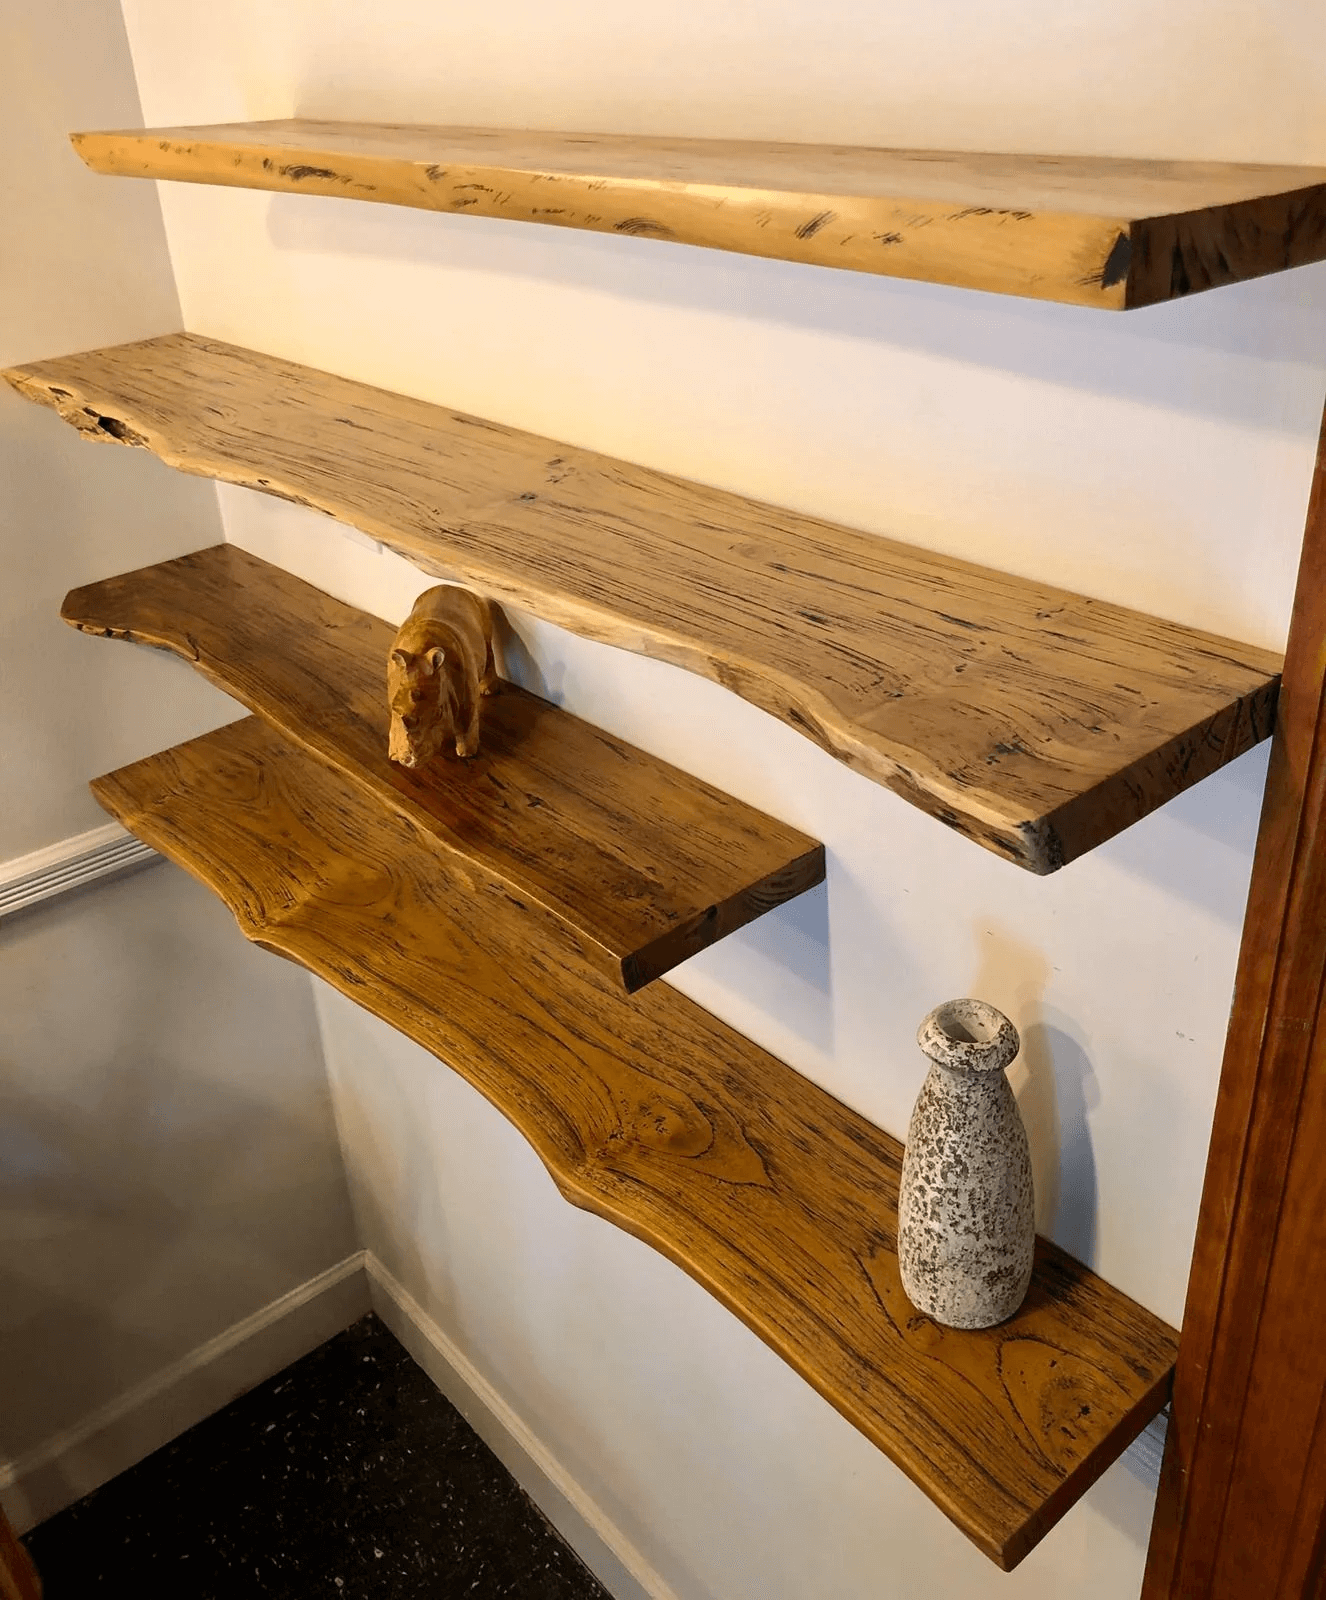 30 rustic wood decor ideas that bring nature into your home - 207